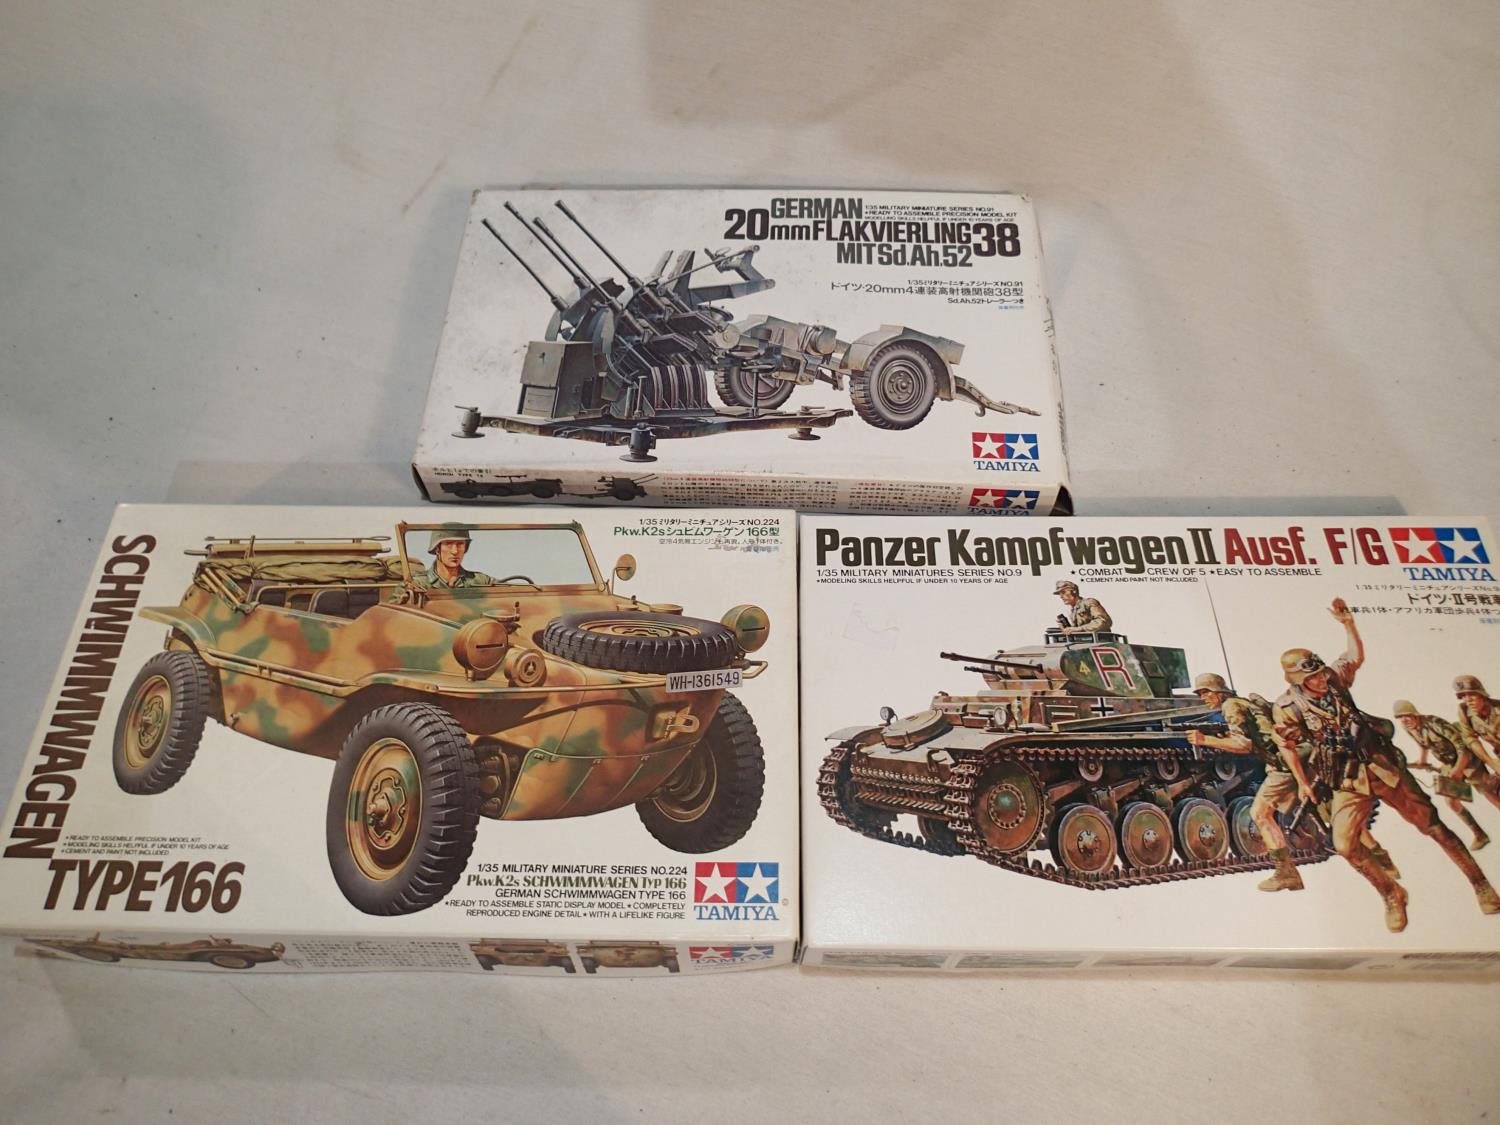 Three 1/35 scale military related kits by Tamiya, 20 mm Flakvierling, Schwimmwagen, Panzer